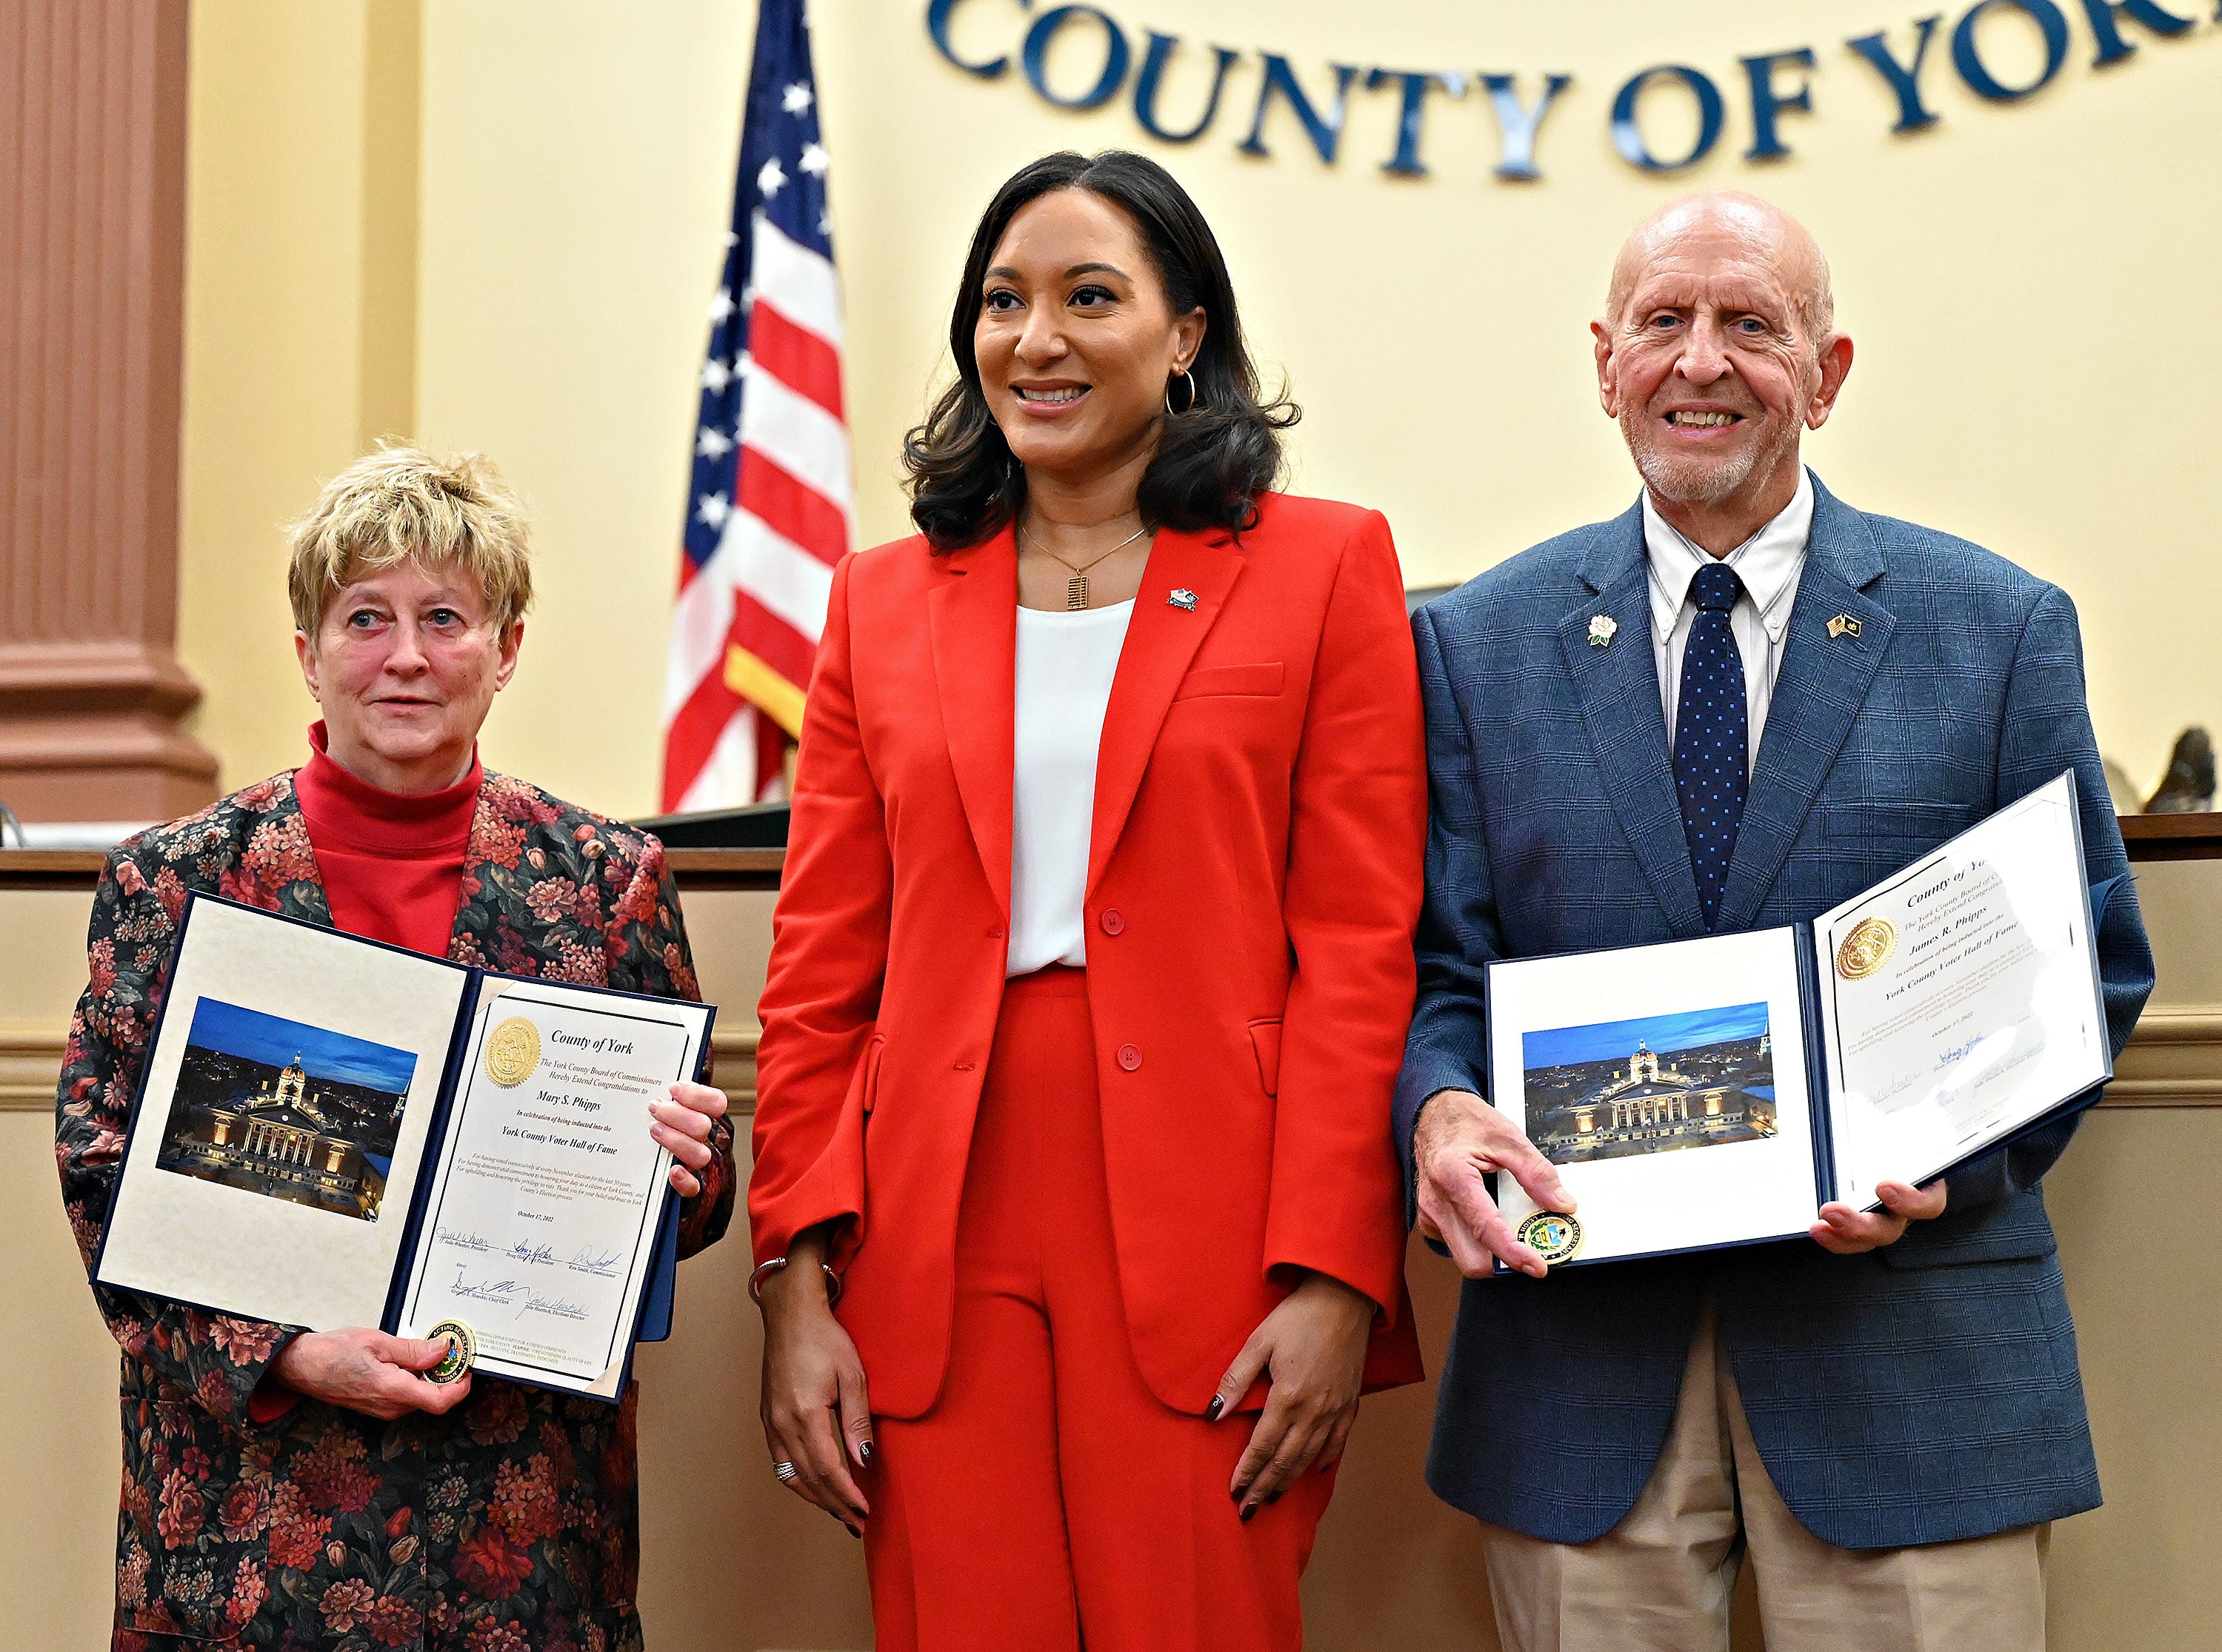 Mary Phipps, left, and James Phipps, right, both of York Township, are photographed with Acting Secretary of State Leigh Chapman following a ceremony held to induct them and three other York County residents into the Pennsylvania Voter Hall of Fame at York County Administrative Center in York City, Monday, Oct. 17, 2022. Recipients have voted in at least 50 consecutive general elections. Dawn J. Sagert/The York Dispatch